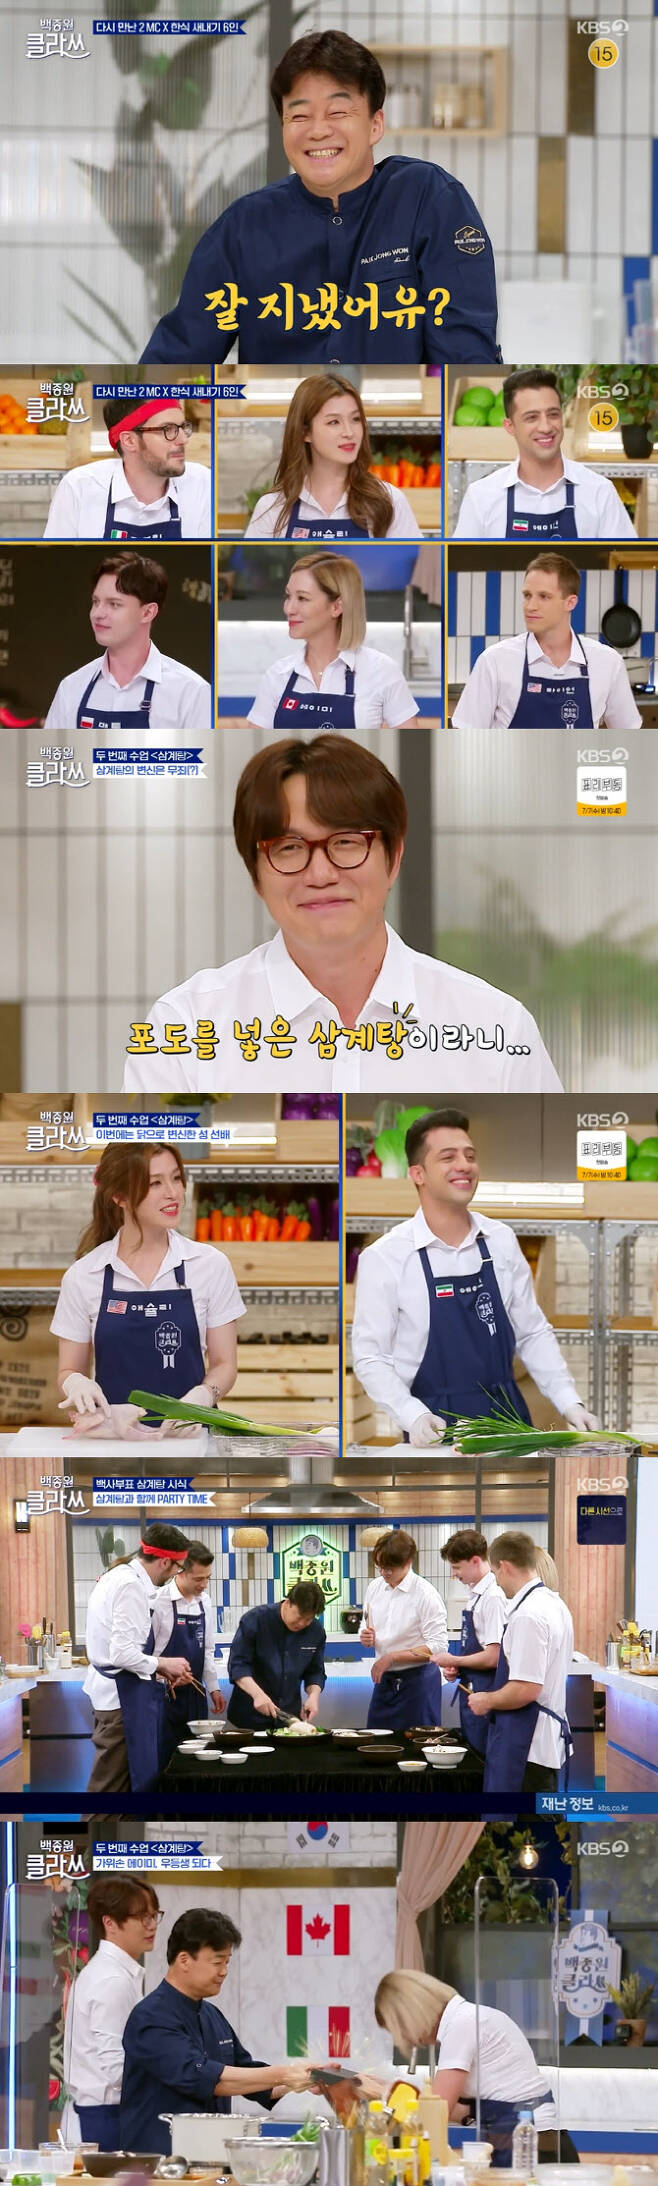 On the 5th, KBS2 entertainment program Baek Jong-won Clath, which was broadcast on the 5th, told us how to make Samgye-tang, a traditional Korean food in summer.Baek Jong-won informed us how to make Koreas Samgye-tang and also taught us how to make global customized Samgye-tang considering the situation of making Samgye-tang overseas.He passed on the express secret that he can use ginseng tea powder instead of raw ginseng, which is difficult to obtain overseas.In addition, we used a large chicken used overseas to show how to put overseas ingredients such as potatoes, sweet potatoes, onions, and canned corn.This kind of Baek Jong-wons Global Customized Samgye-tang stimulated the curiosity of Korean viewers as well as overseas viewers.In addition, we are expecting what Korean will be like in the future, which will be presented at the Baek Jong-won Clath.In addition, Baek Jong-won also unveiled a honey tip that allows Samgye-tang to enjoy more delicious samgye-tang for Korean viewers who are familiar with Samgye-tang.The first honey tip was a special sauce, which was highly utilized and attracted the attention of viewers, as well as Samgye-tang, as well as special sauce that can be accompanied by when just boiling and eating chicken.The second honey tip was the Chicken Lu Shuming application method.Baek Jong-won recommended Chicken Lu Shuming to be served with dilapidation, leeks and sided with Samgye-tang and to boil and eat like porridge with scorched rice in Chicken Lu Shuming.The Baek Jong-won table Samgye-tang, completed with such various honey tips, stimulated the salivary glands of viewers.Sung Si-kyung has been active as a cooking senior for global Korean newbies.When the newbies were cooking, they approached and helped them directly, and if they did not understand, they showed a sense of explanation in English.Also, Sung Si-kyung turned into a chicken this week, following a cow (), which made everyone laugh.As such, Sung Si-kyung showed his presence in a culinary and talk-customized entertainer-like manner.Also, the Samgye-tang of Korean newbies was also noticed for showing the possibility of globalized Samgye-tang.Matthew of Poland was inspired by his chef mothers cooking and put onions, while Aiden of Iran completed a unique Samgye-tang by putting a rash that he often put in Iran cuisine instead of jujube.Ryan of the United States showed unexpected creativity by finely chopping up nights and potatoes.Valeria Fabrizi of Michelin chef Italy, who was most anticipated, made an attempt to put Italian rice in place of Korean rice.In addition, grapes and jujube palms were added to predict the birth of European samgye-tang, but the rice was not cooked, which made everyone sad.In the end, Amy of Canada, who was faithful to the basics as Baek Jong-won explained, won the first prize and enjoyed the honor of receiving the Baek Jong-won knife.As such, Baek Jong-won Clath is teaching Korean basics to Korean master Baek Jong-won and food talk ballader Sung Si-kyung to cooperate and global Korean newbies to properly inform Koreans charm to the world.Baek Jong-won Clath is broadcast every Monday at 8:30 pm.